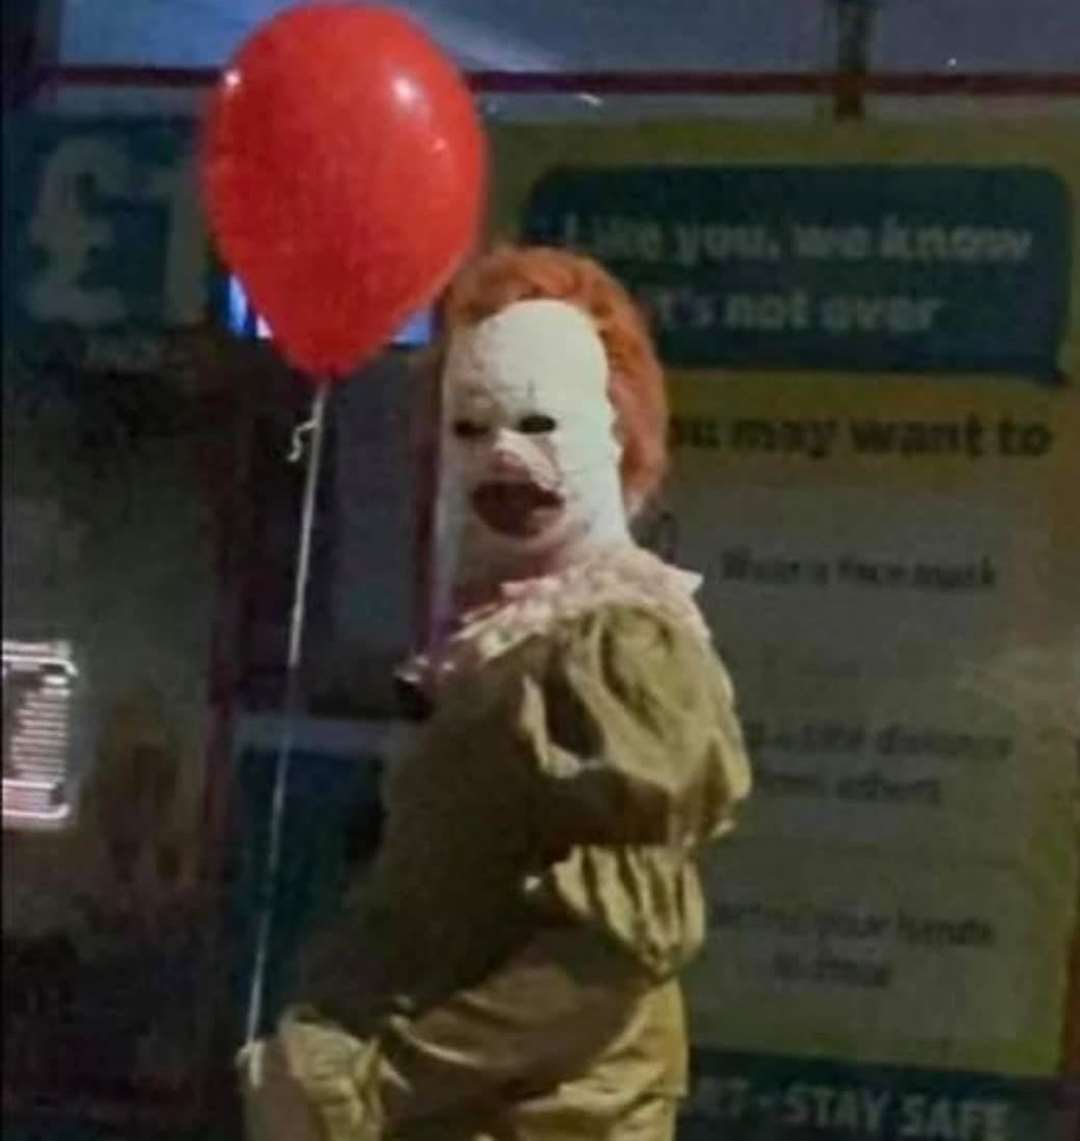 Locals have reported numerous sightings of the terrifying clown. Photo: Facebook/ HalloweenThanet